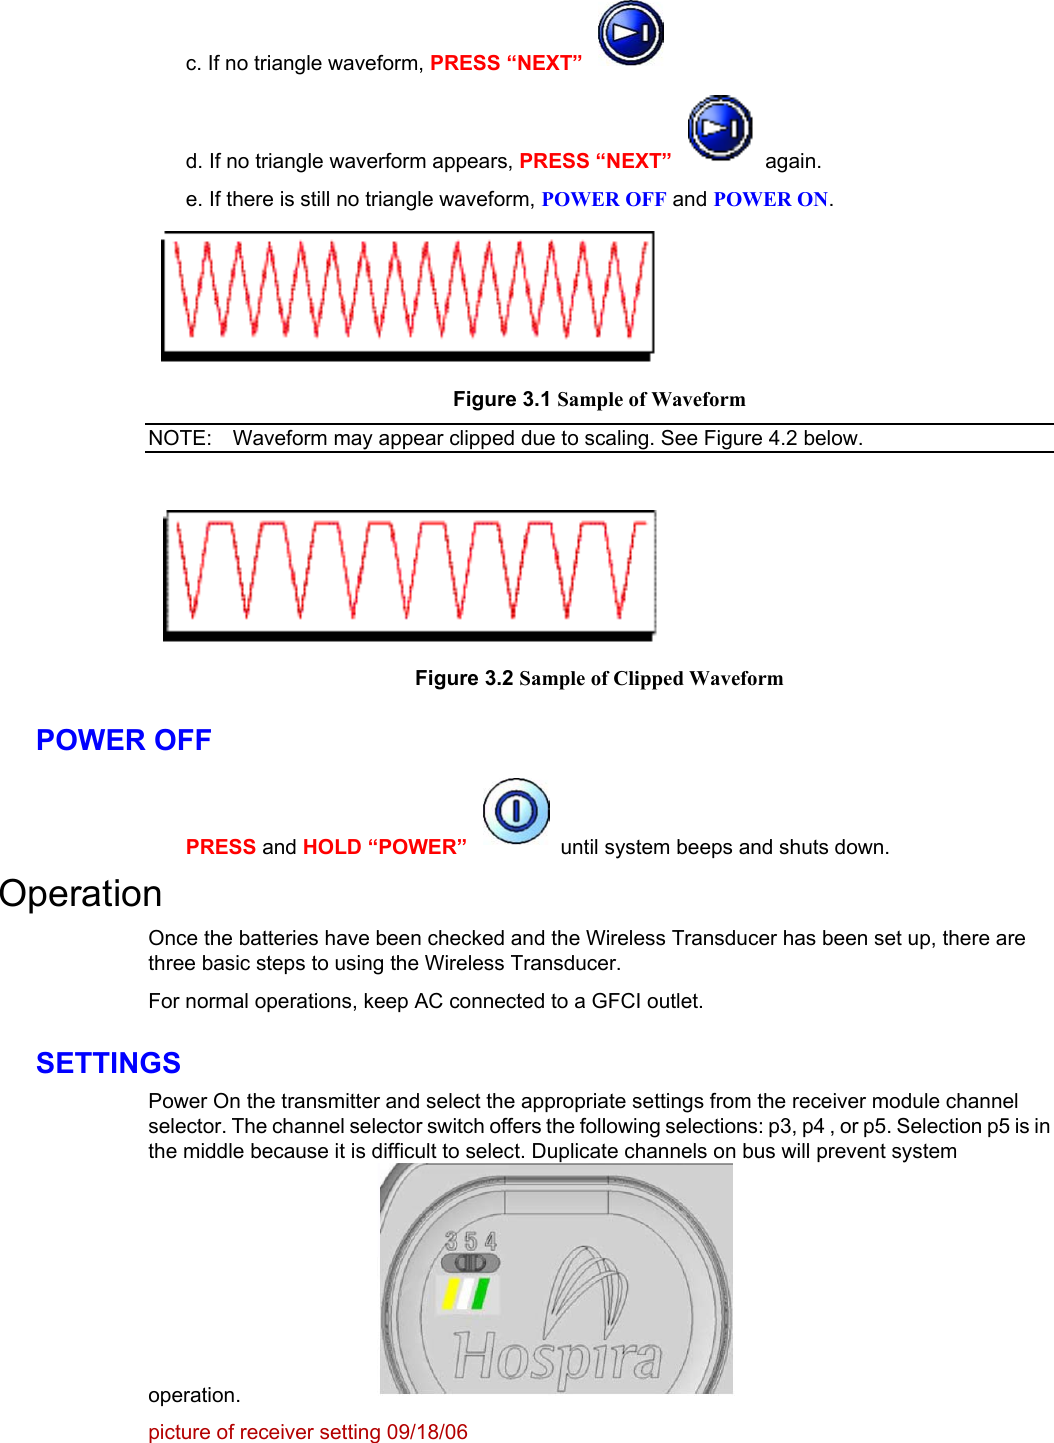    c. If no triangle waveform, PRESS “NEXT”   d. If no triangle waverform appears, PRESS “NEXT”  again. e. If there is still no triangle waveform, POWER OFF and POWER ON.  Figure 3.1NOTE:  Sample of Waveform Waveform may appear clipped due to scaling. See Figure 4.2 below.    Figure 3.2 Sample of Clipped Waveform POWER OFF PRESS and HOLD “POWER”  until system beeps and shuts down. Operation Once the batteries have been checked and the Wireless Transducer has been set up, there are three basic steps to using the Wireless Transducer. For normal operations, keep AC connected to a GFCI outlet. SETTINGS Power On the transmitter and select the appropriate settings from the receiver module channel selector. The channel selector switch offers the following selections: p3, p4 , or p5. Selection p5 is in the middle because it is difficult to select. Duplicate channels on bus will prevent system operation.  picture of receiver setting 09/18/06 